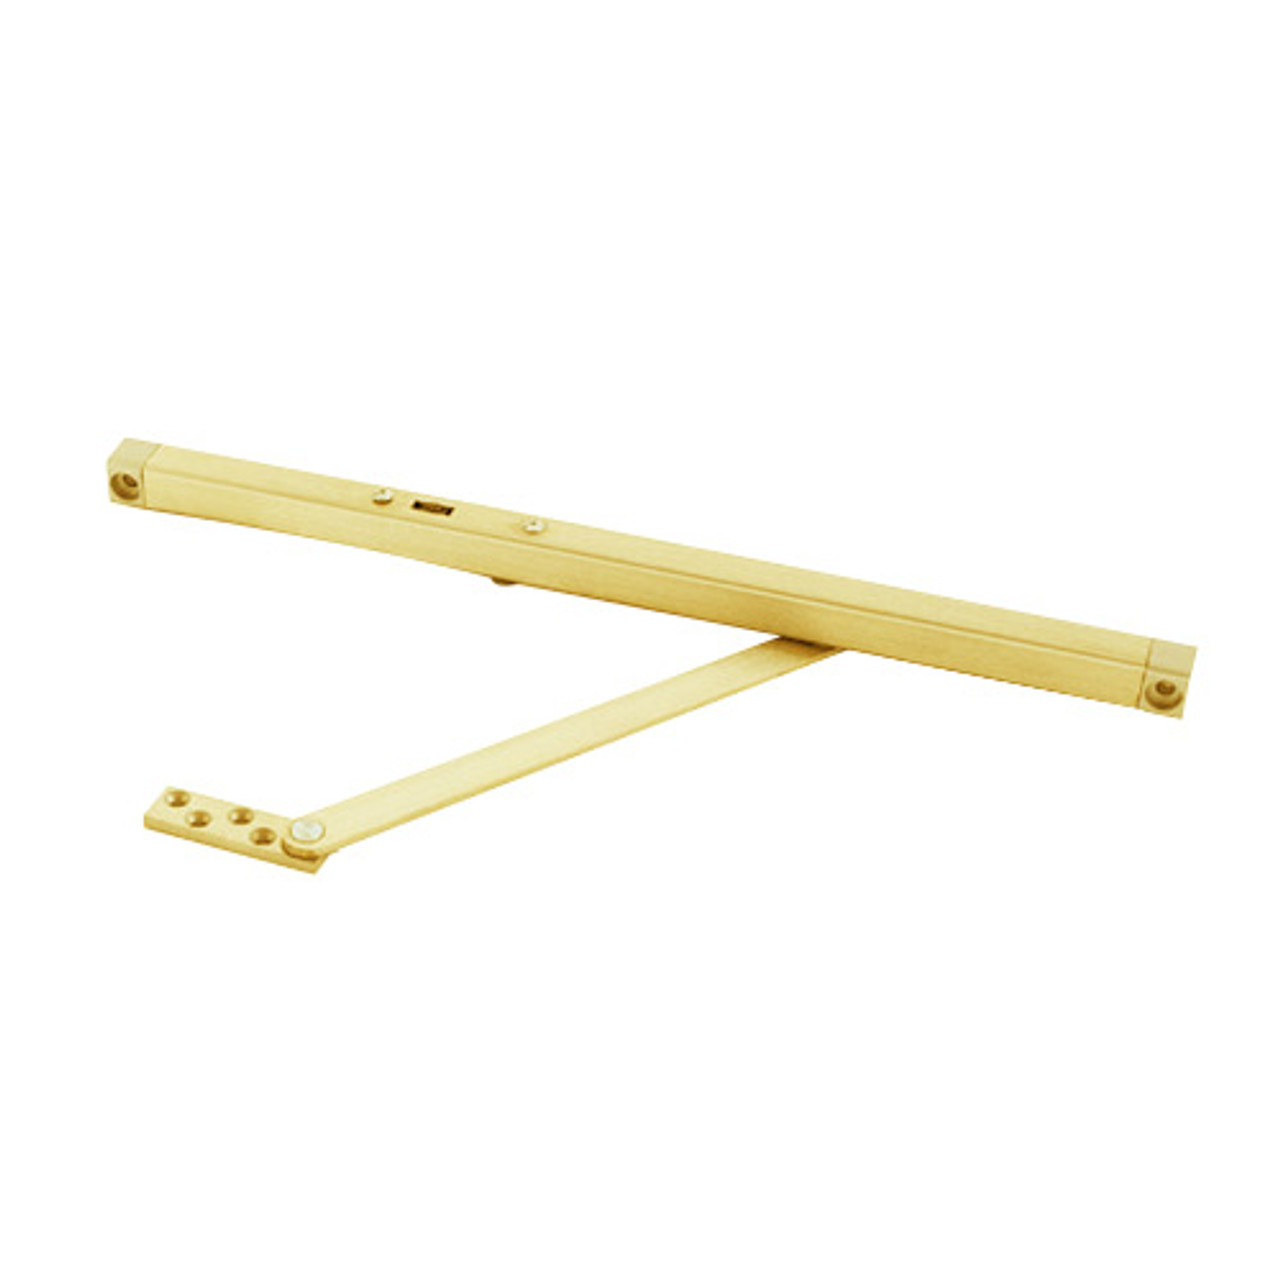 906F-US3-SHIM-2 Glynn Johnson 90 Series Heavy Duty Surface Overhead Friction Hold Open with 1/2 inch Shim for Blade Stop Mounting in Bright Brass